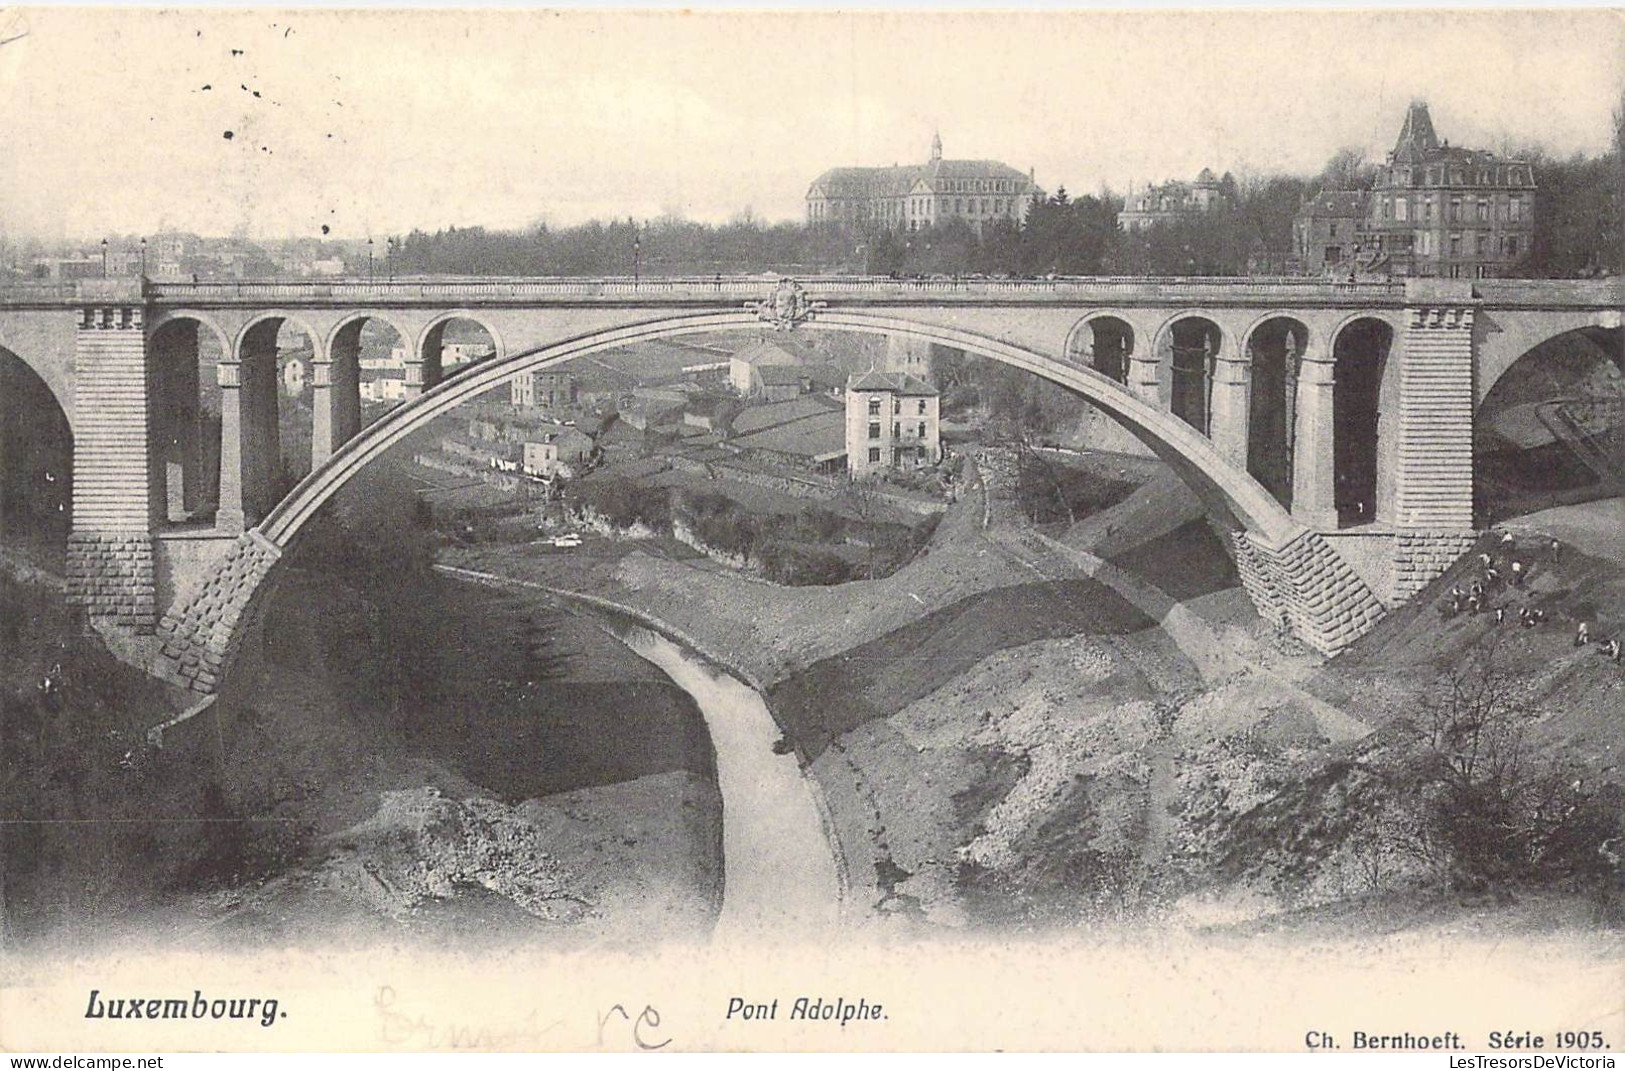 LUXEMBOURG - Pont Adolphe - Carte Postale Ancienne - Luxemburg - Town